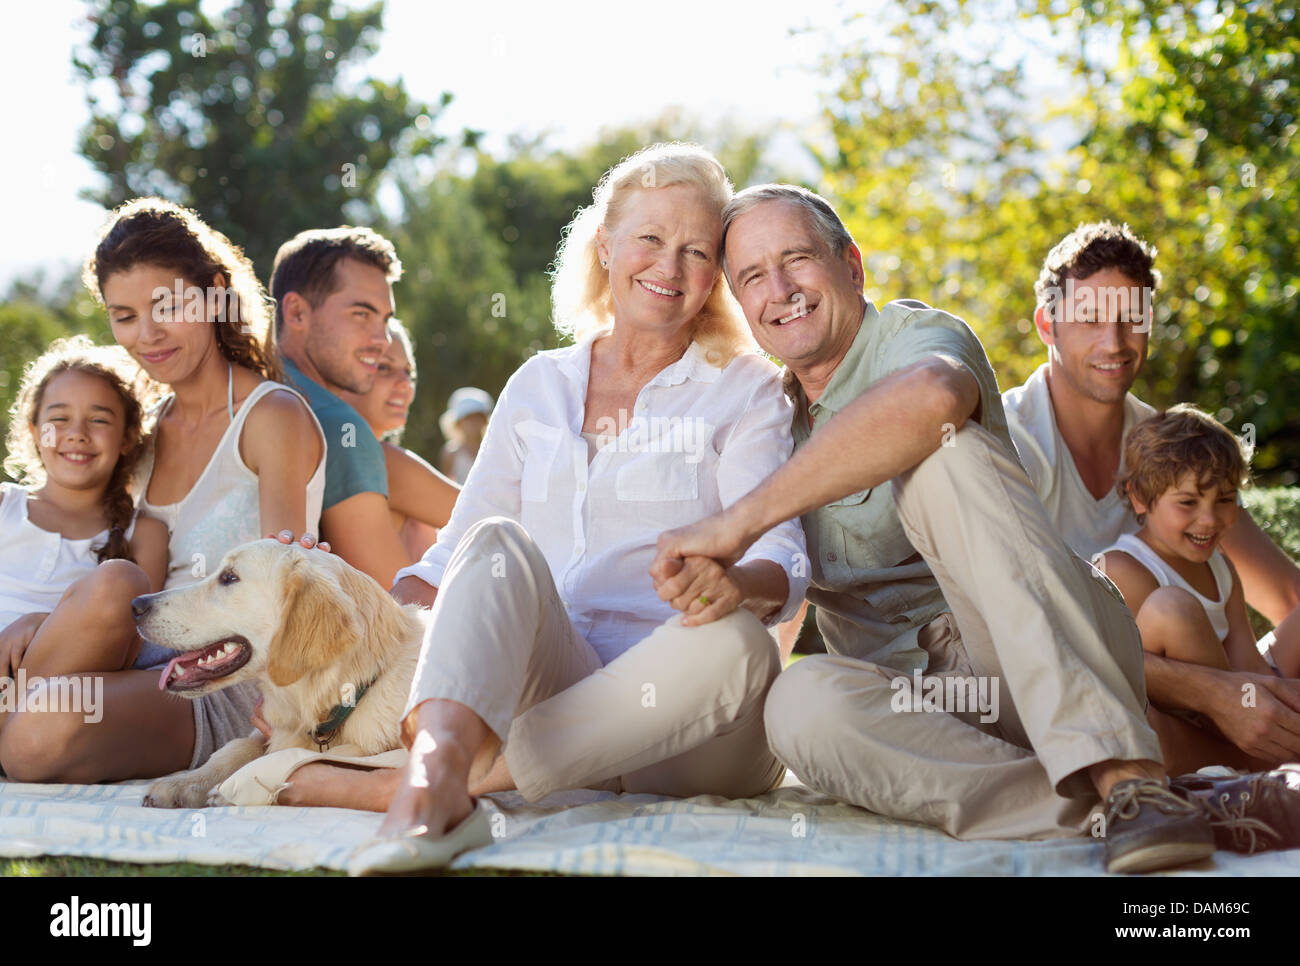 Family relaxing together in backyard Banque D'Images